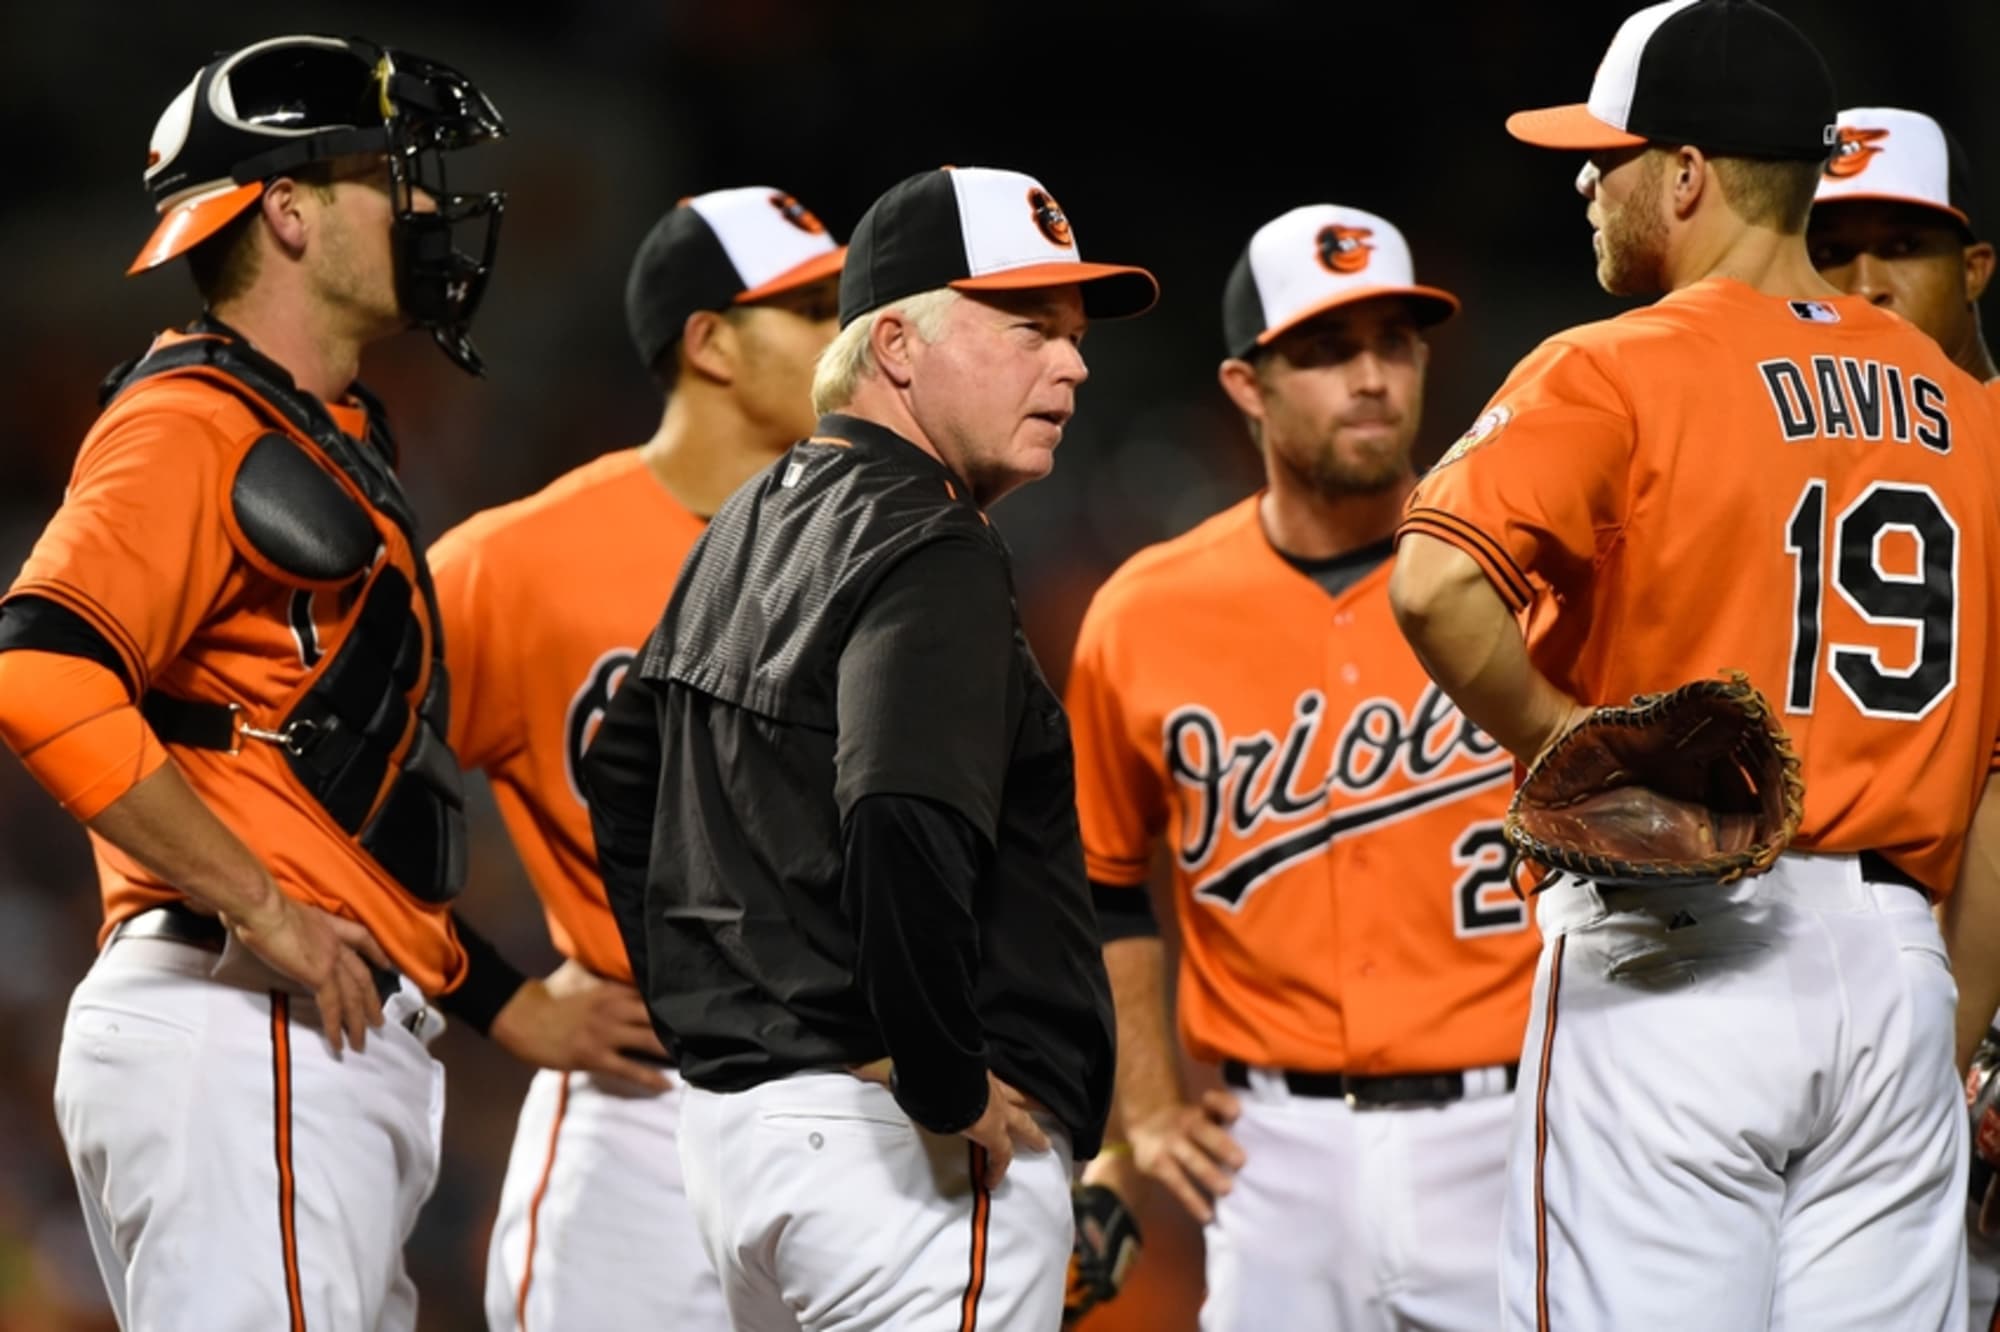 Baltimore Orioles: Select Your Pitcher from the List